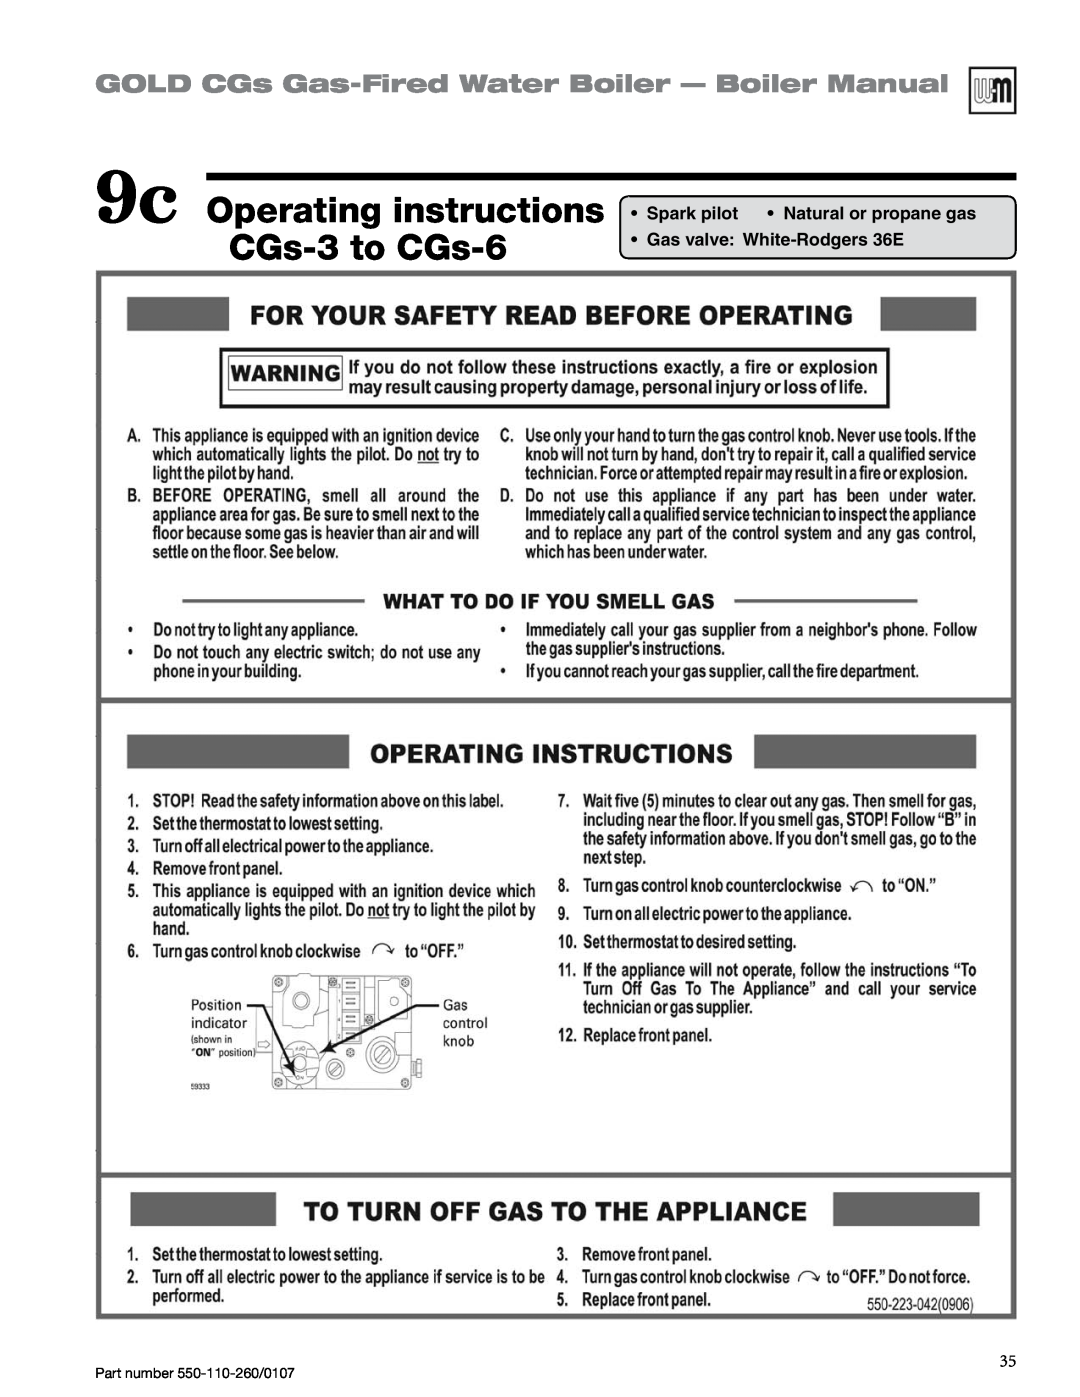 Weil-McLain 550-110-260/0107 manual 9c Operating instructions CGs-3to CGs-6, GOLD CGs Gas-FiredWater Boiler — Boiler Manual 